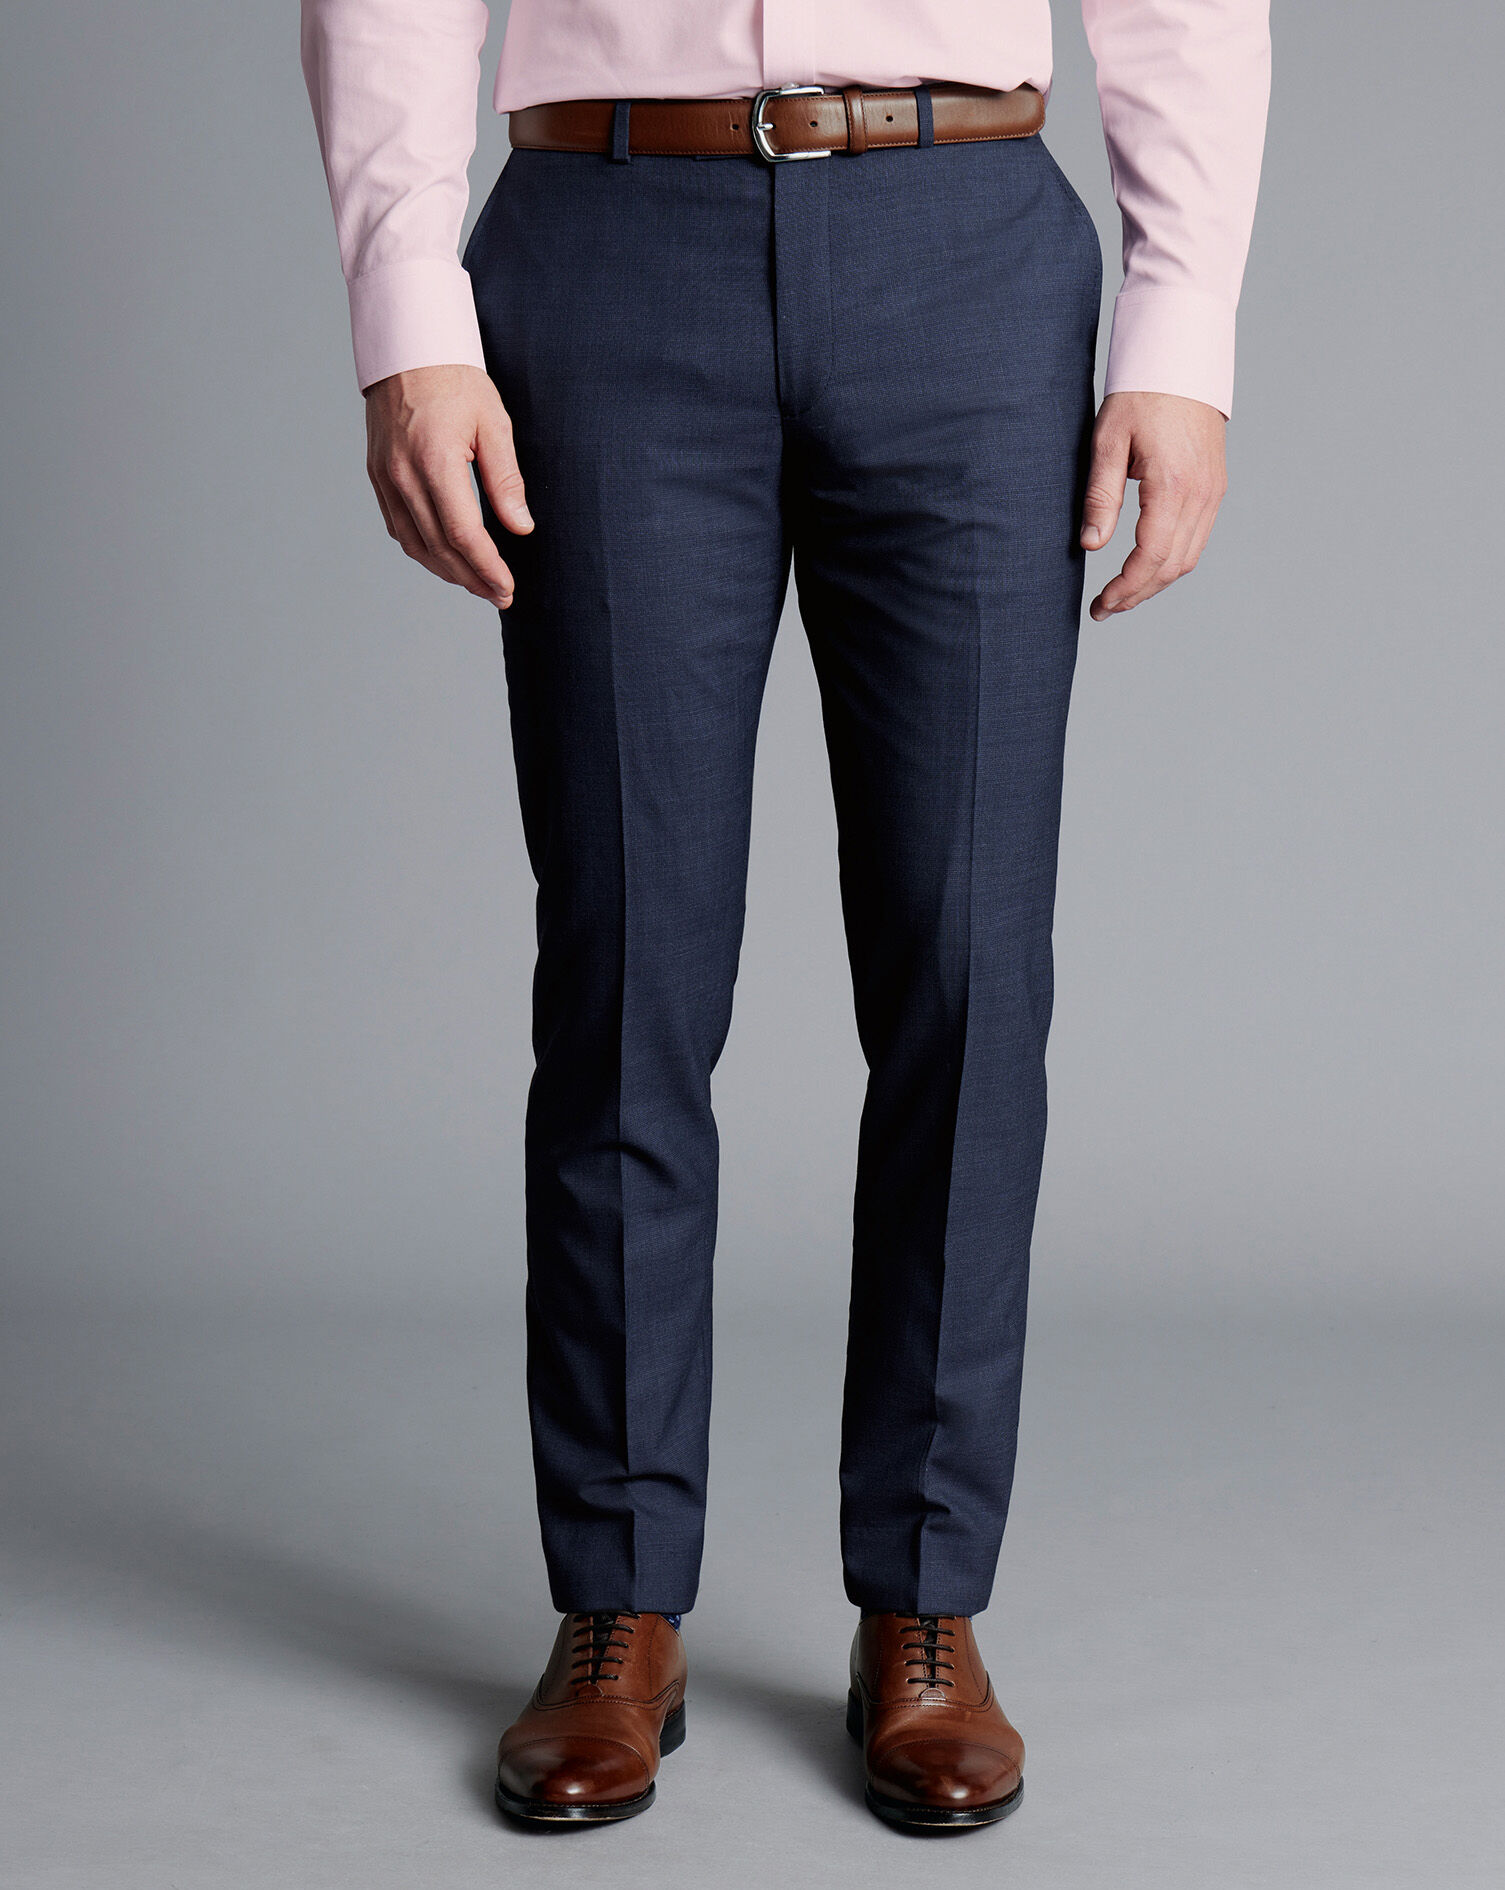 Buy Navy Blue Slim Fit Dress Pants by GentWith.com with Free Shipping